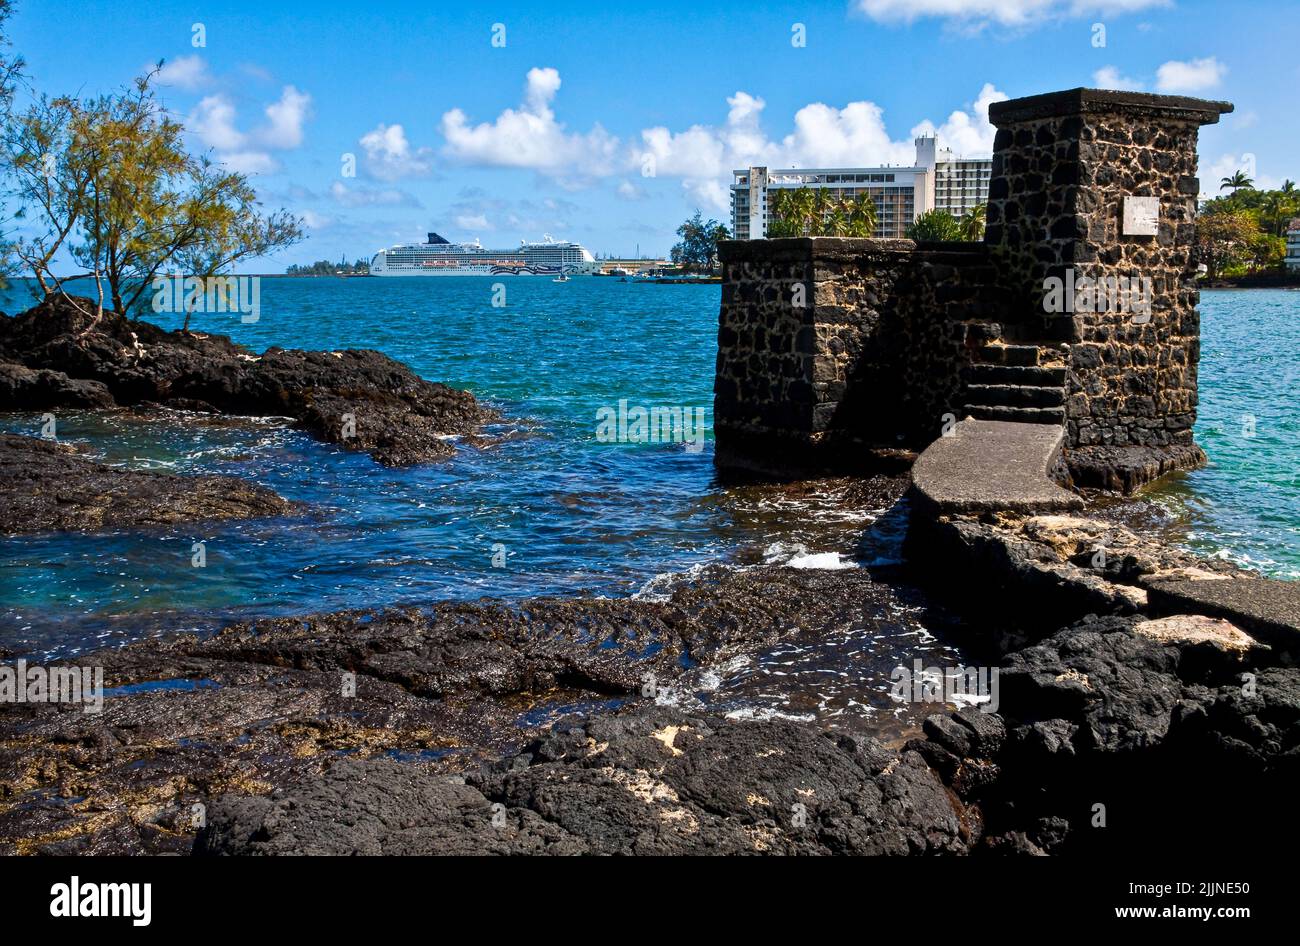 Cruise Ship at Port and Old Tower From  Coconut Island Park, Hilo, Hawaii, USA Stock Photo